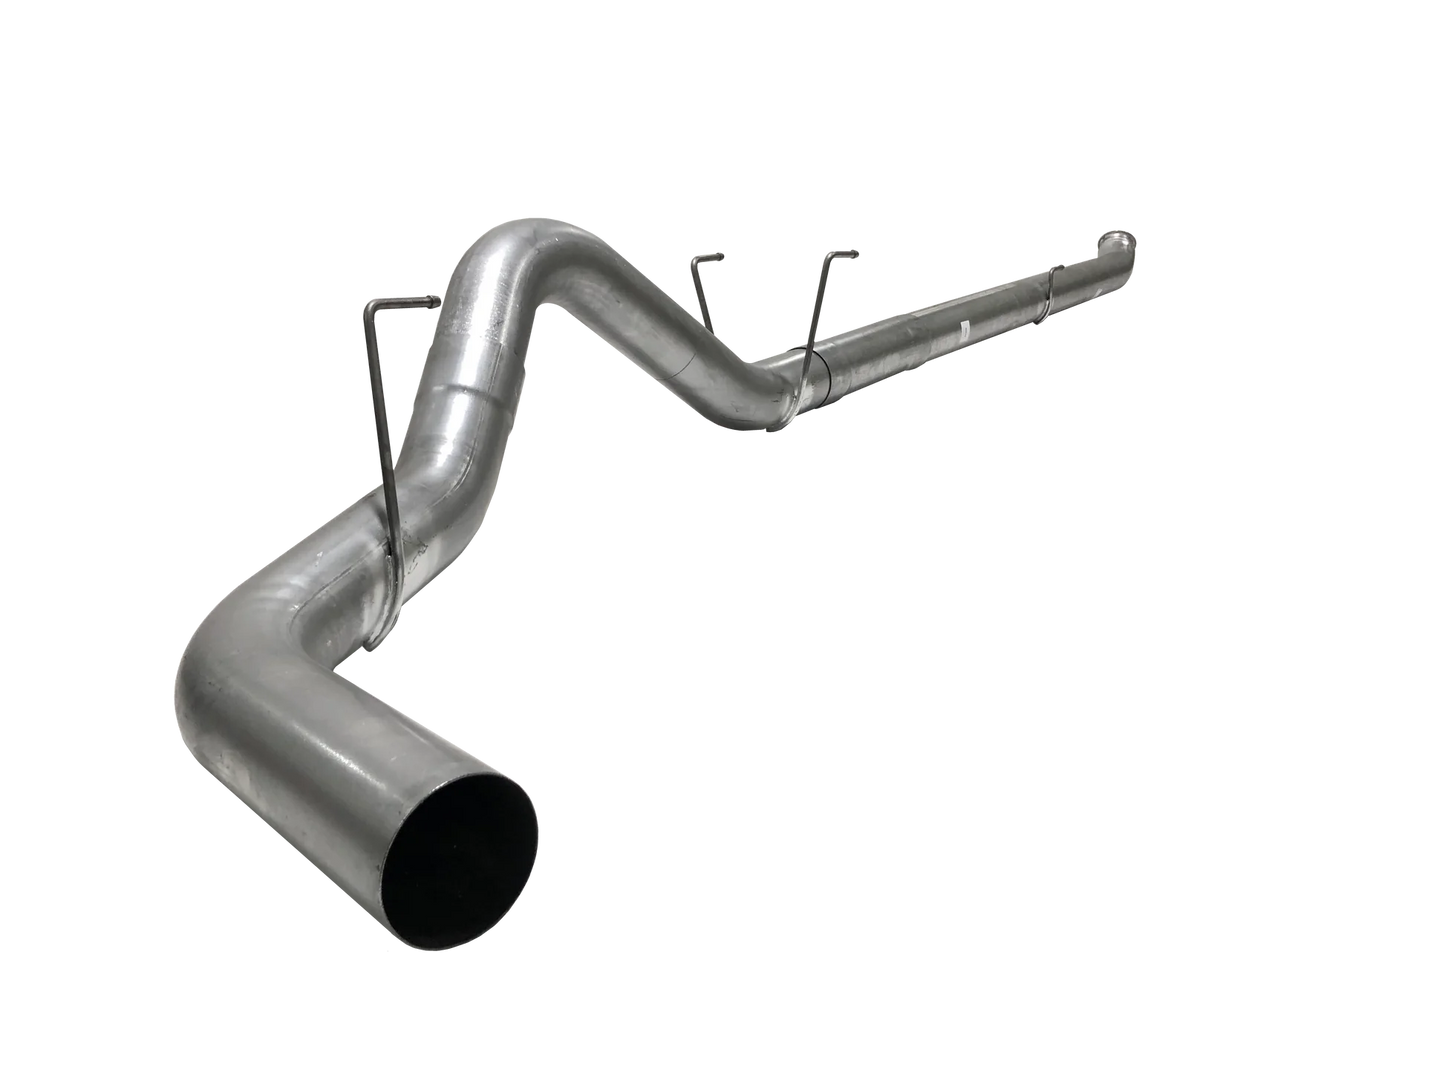 511017 511018 512014 512015 Mel's Manufacturing 5" Flex Pipe Back Single | 2019+ Ram 3500 6.7L Cummins Mels Mfg FloPro Flo-Pro Flo Pro Hell On Wheels Performance Ltd Limited Canadian Owned and Operated Online Diesel Parts Distribution & Wholesale Supply Center in Alberta Canada Shipping Supplying to Alberta British Columbia Sask Saskatchewan Manitoba Ontario Quebec Newfoundland Labrador New Brunswick Nova Scotia Prince Edward Island AB BC SK MB ON QC PQ NS NB NFLD N.L. PEI